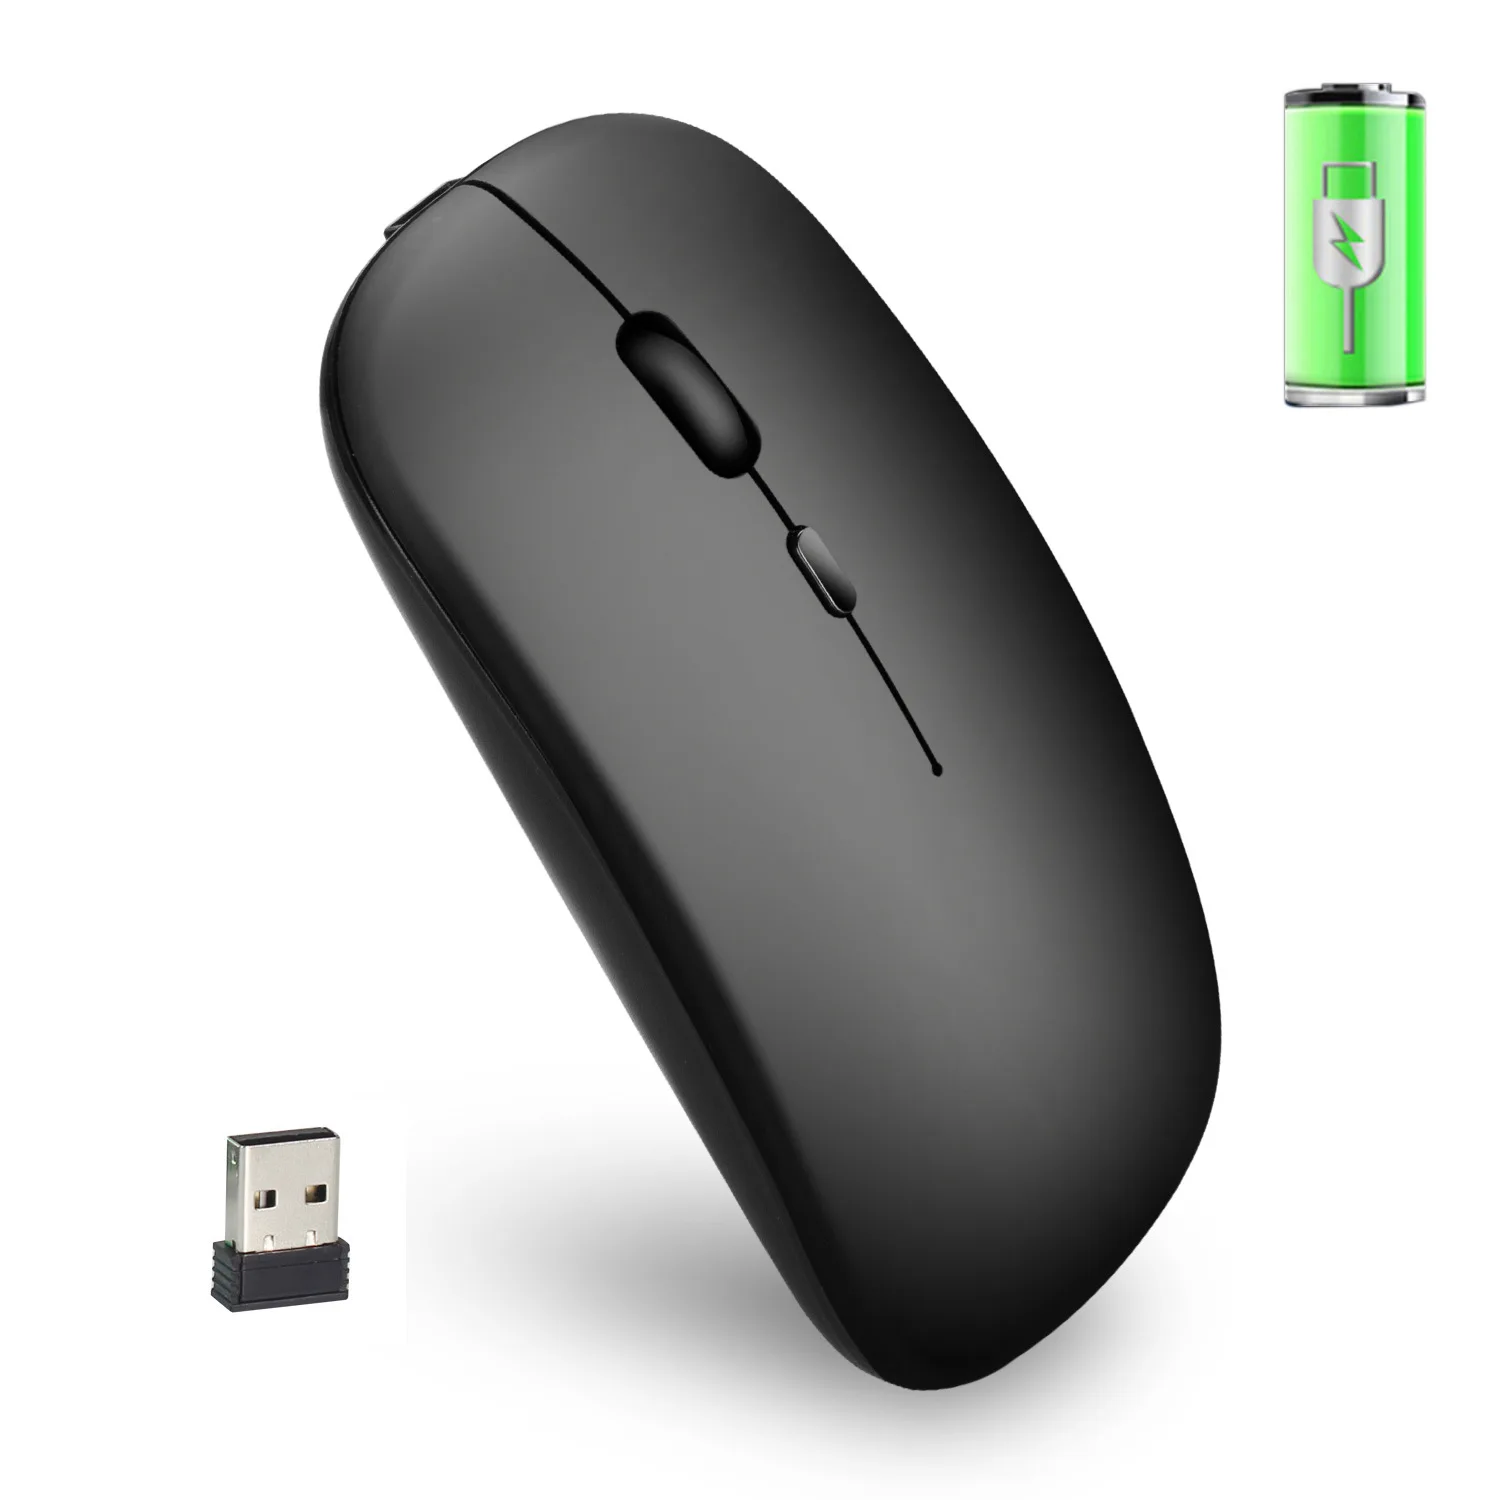 Color : White M90 2.4GHz Ultrathin Mute Rechargeable Dual Mode Wireless Bluetooth Notebook PC Mouse